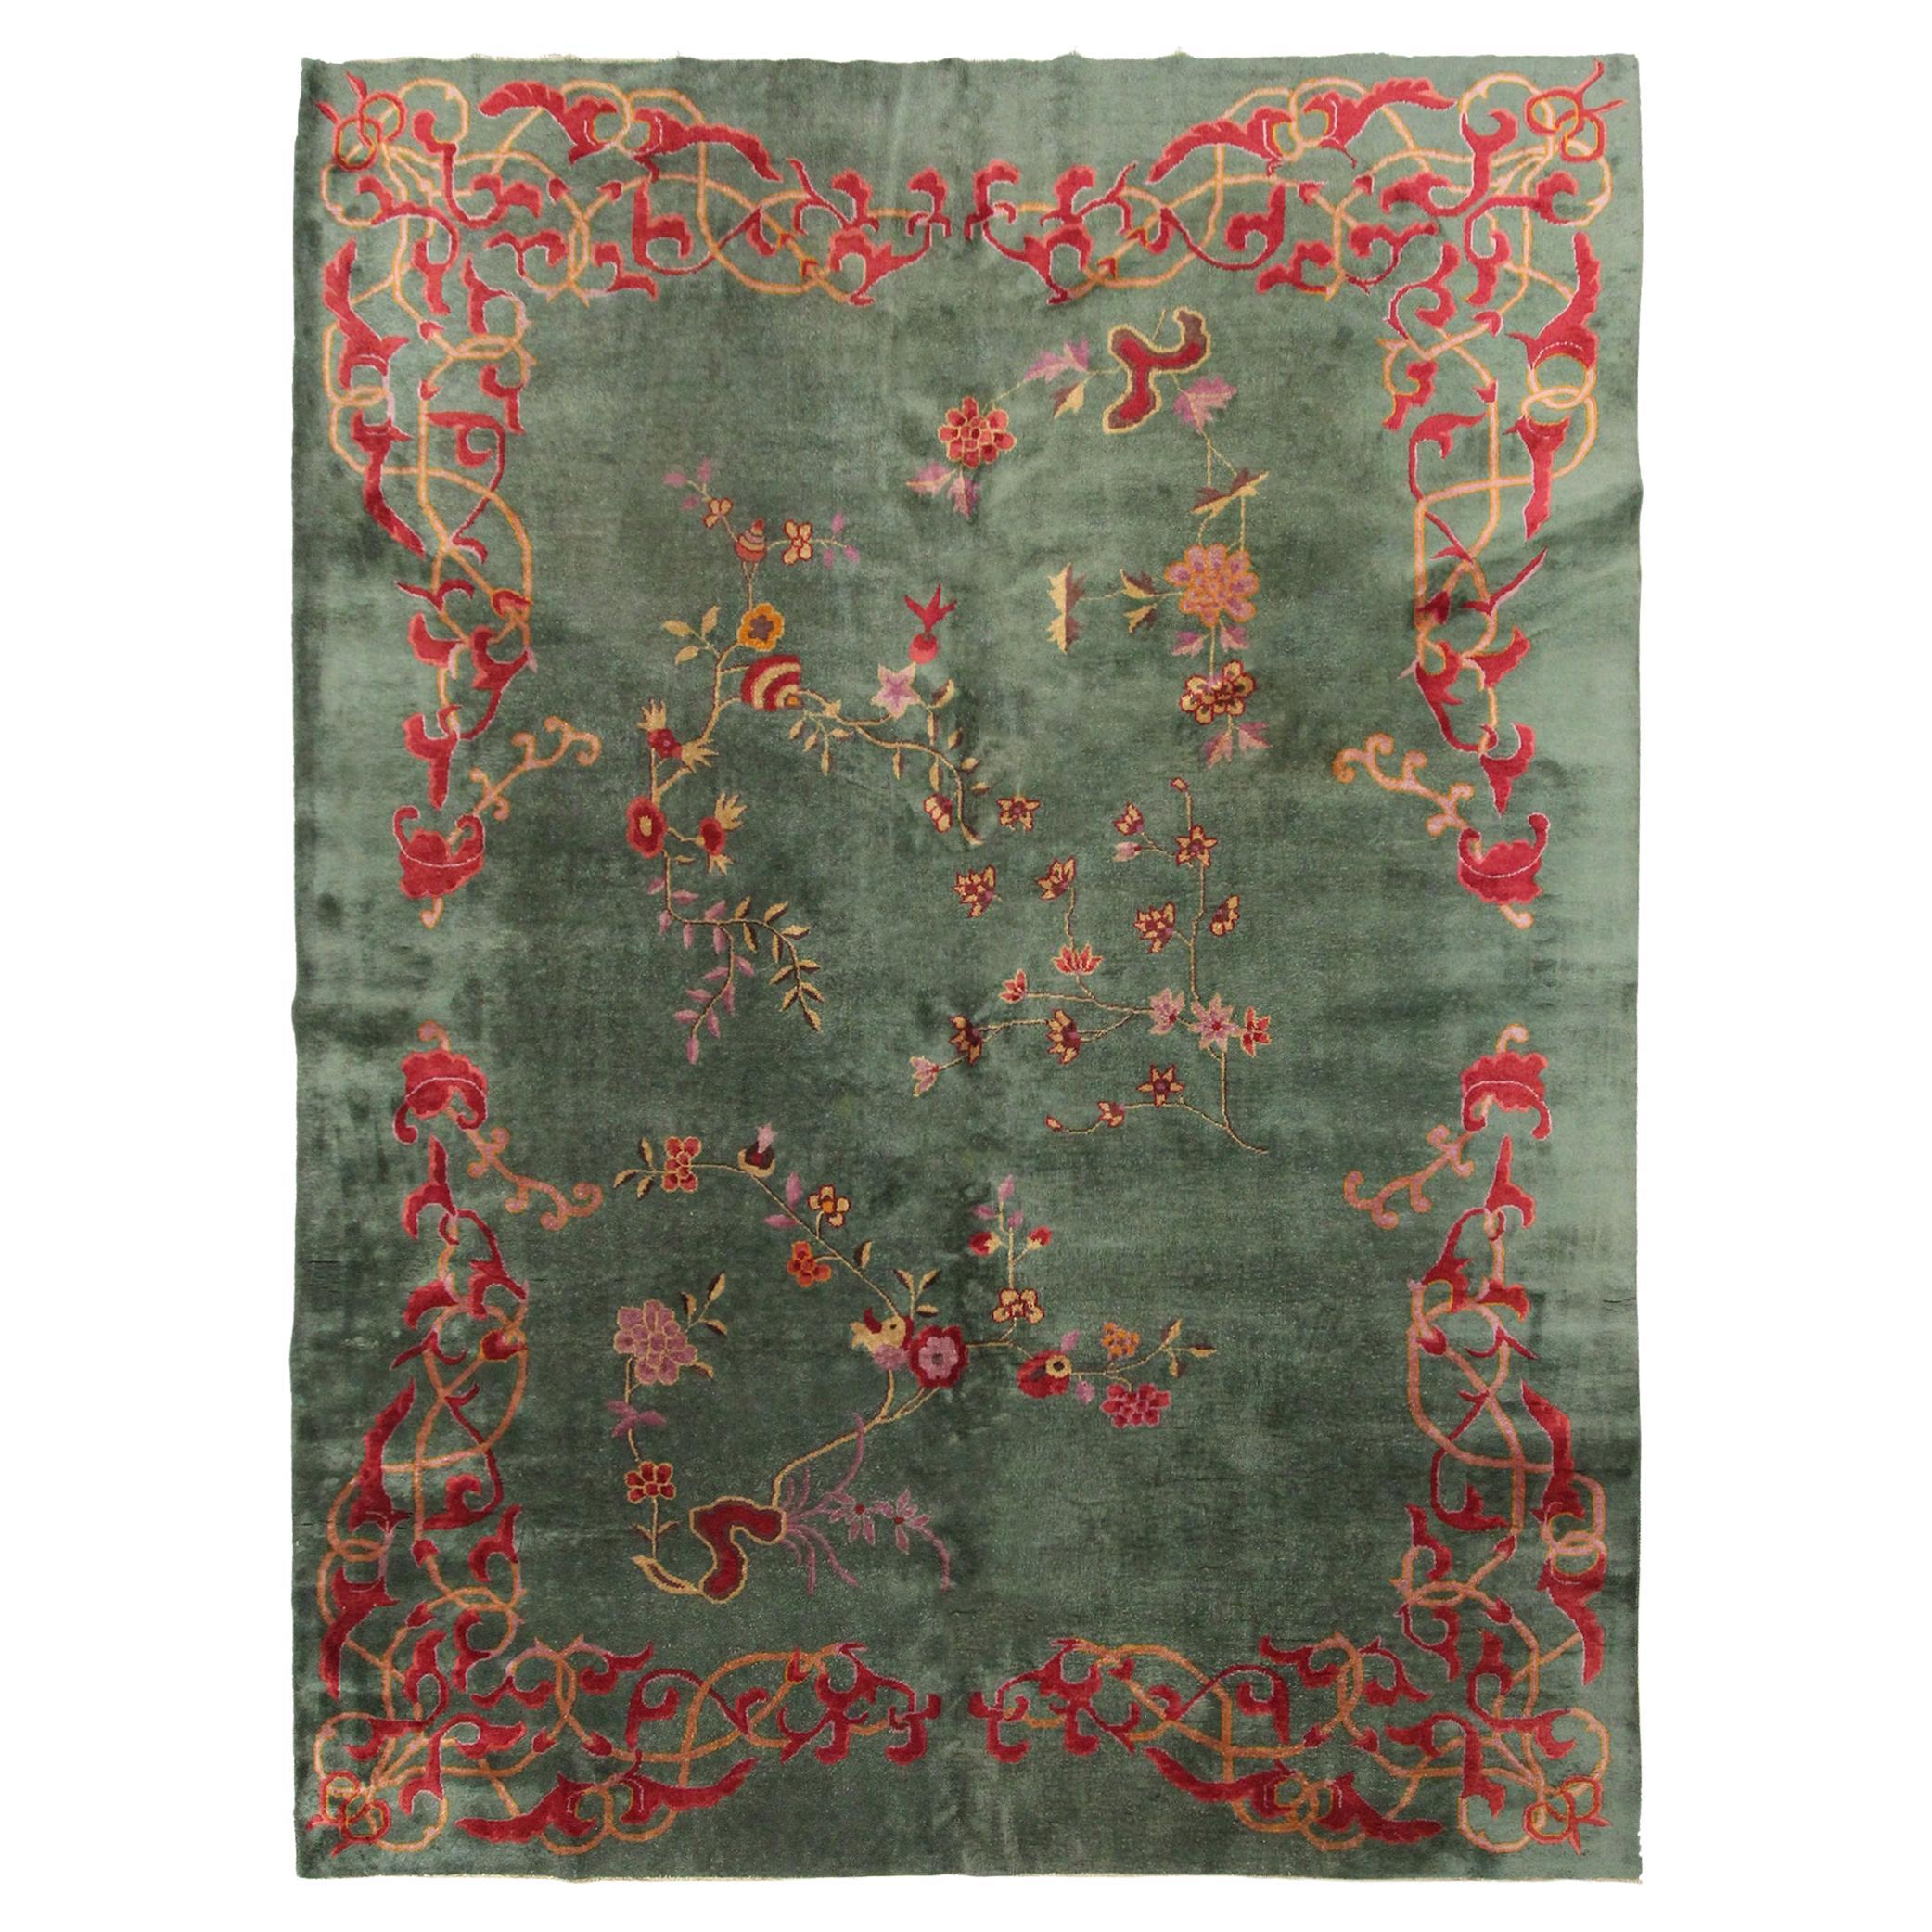 Antique Art Deco Chinese Rug Antique Chinese Rug Antique Art Deco Rug Green